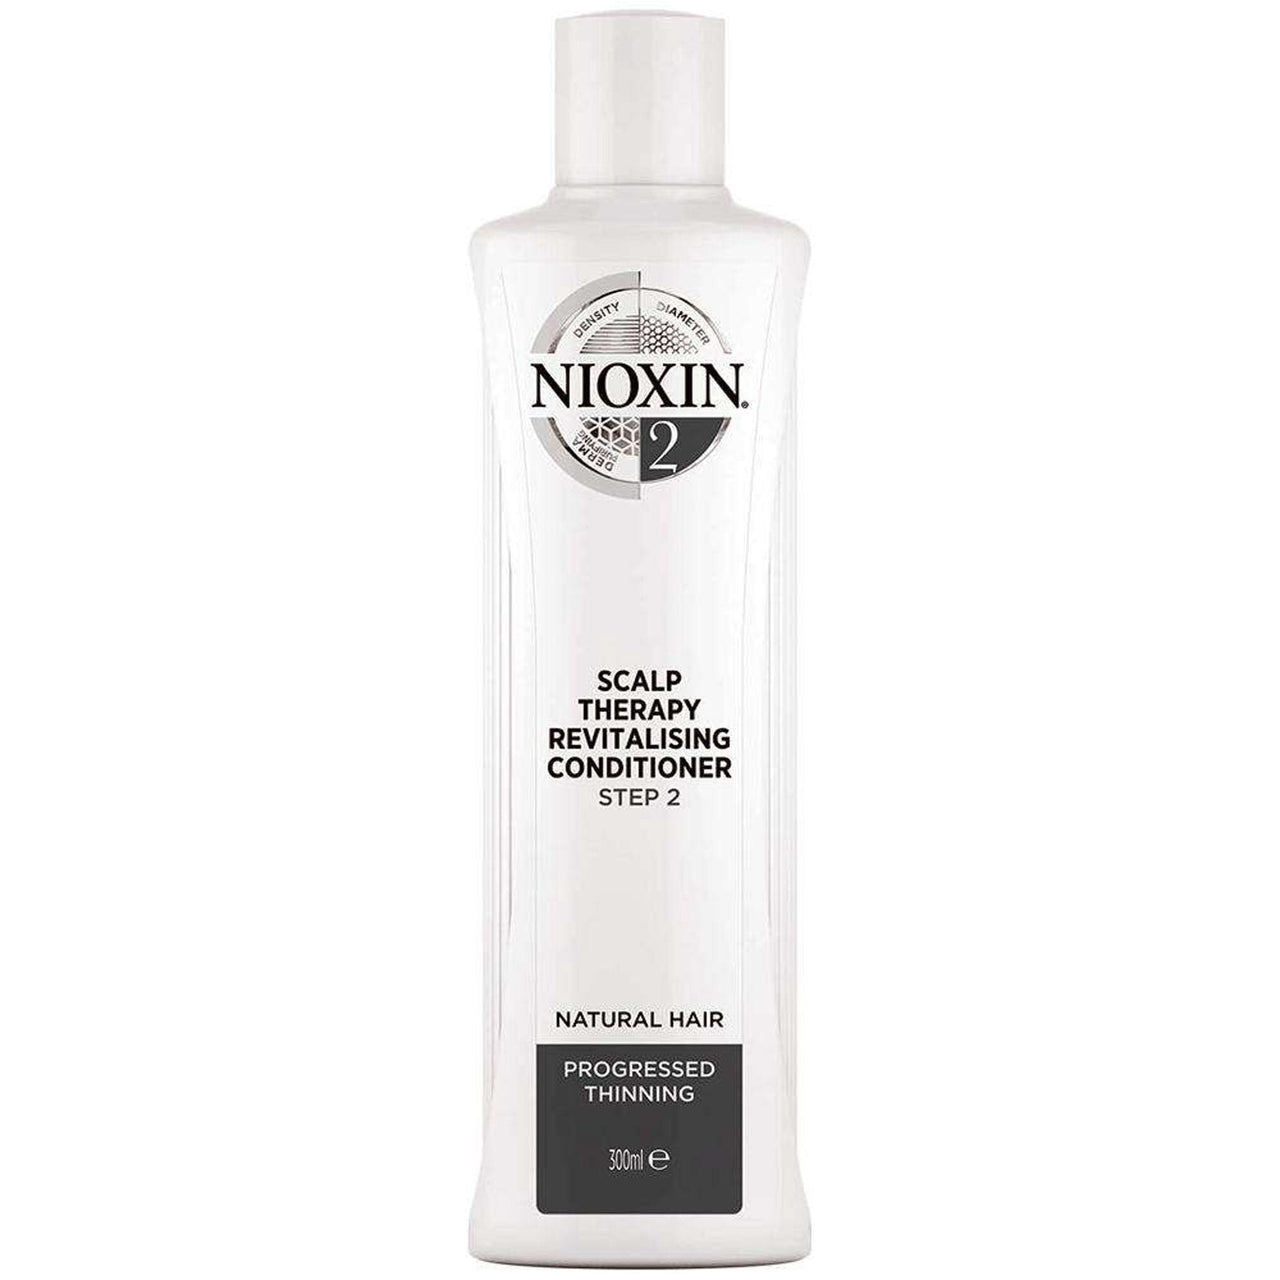 NIOXIN_Nioxin 2 Scalp Therapy Conditioner - Natural Hair Progressed Thinning_Cosmetic World